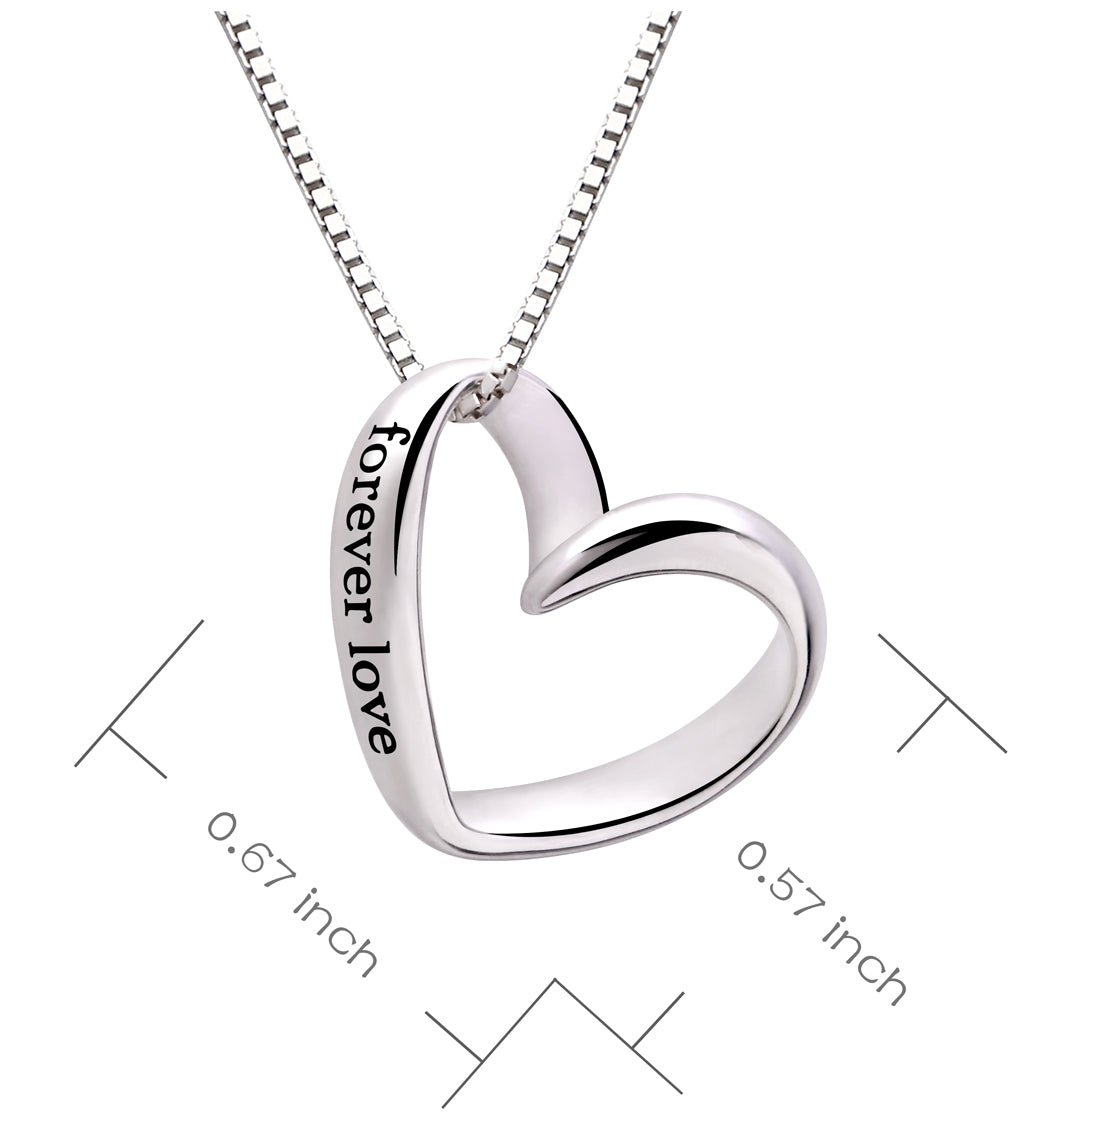 ALOV Jewelry Sterling Silver forever love Heart Pendant Necklace